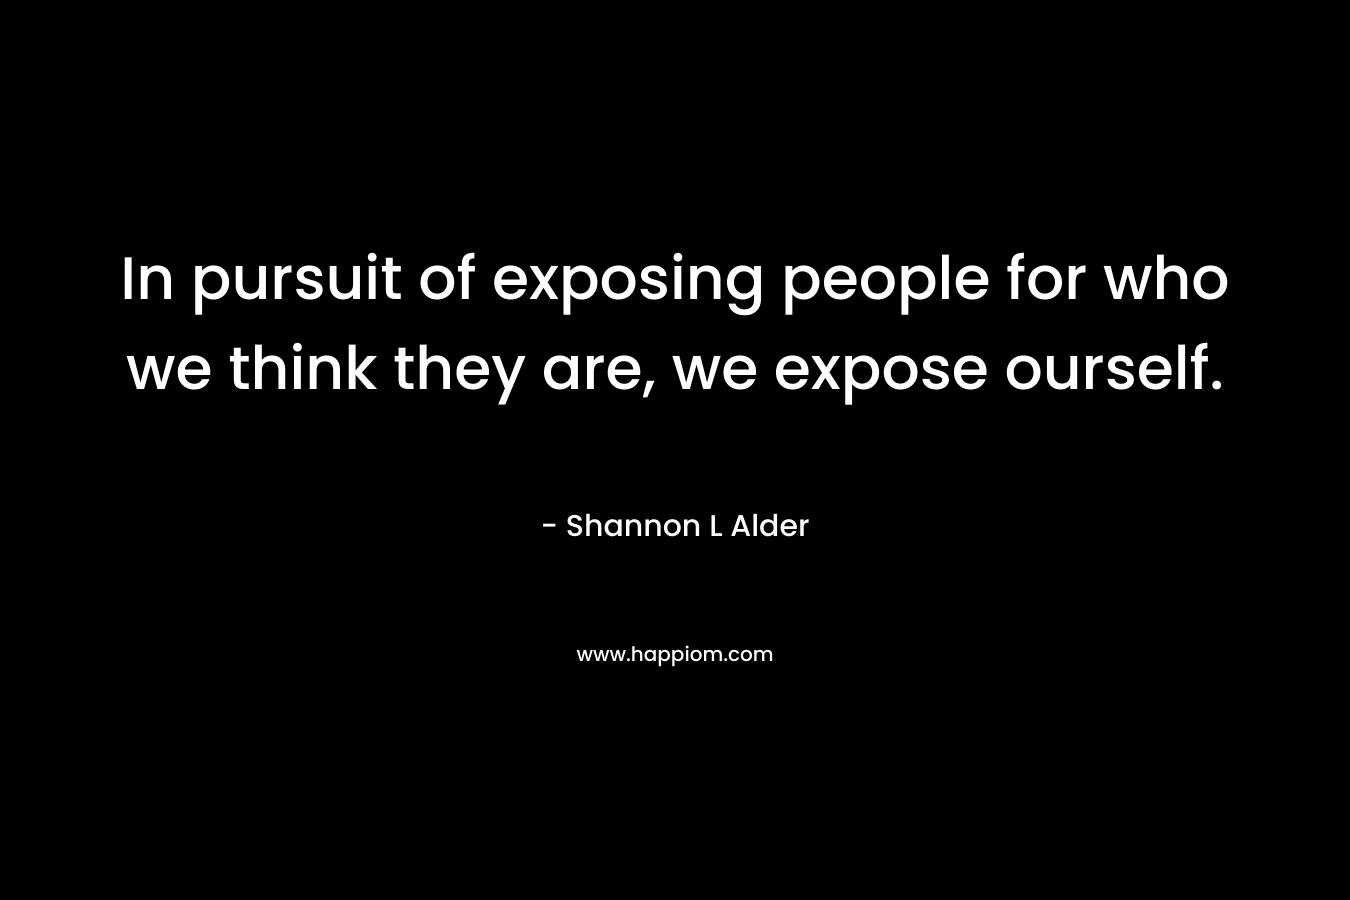 In pursuit of exposing people for who we think they are, we expose ourself.